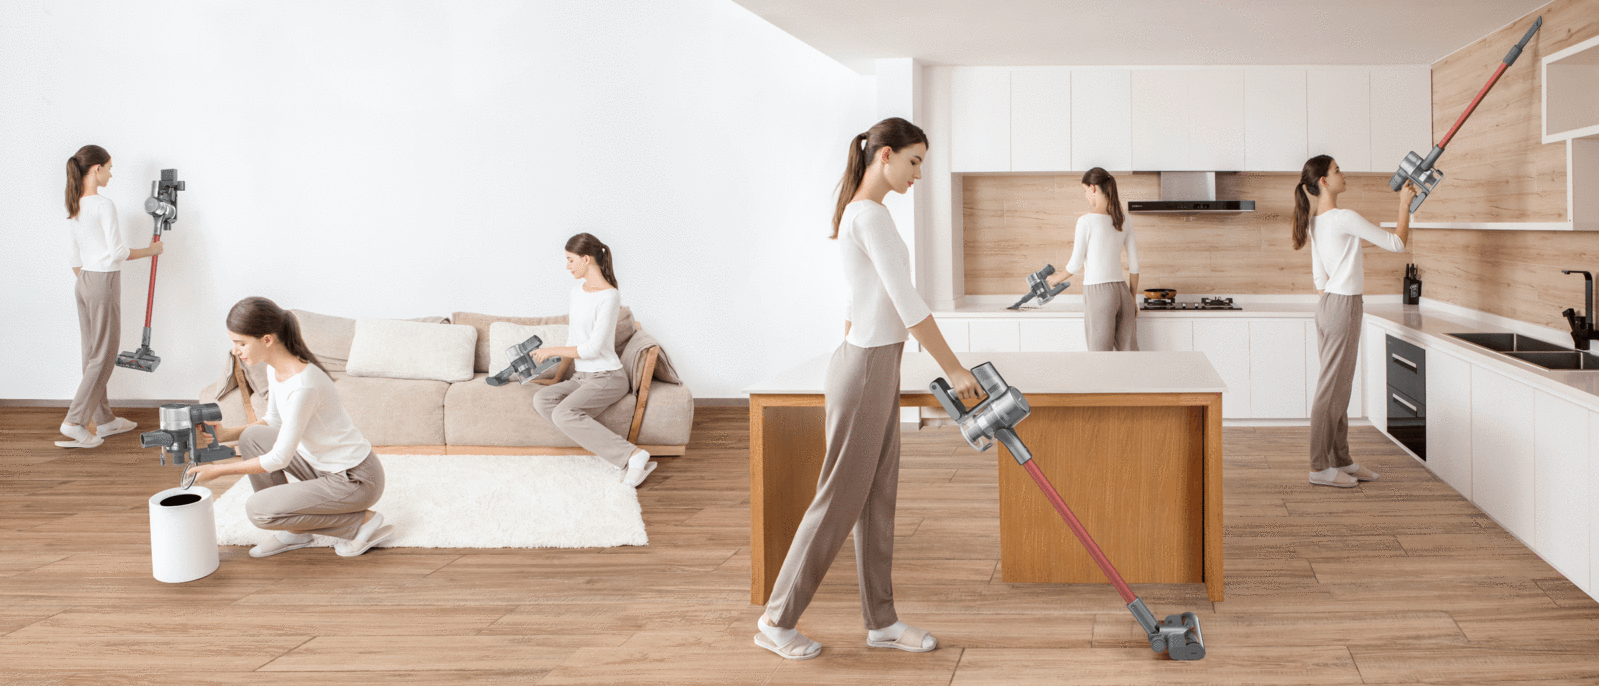 2021 Dreame T20 Handheld Cordless Vacuum Cleaner Highlights and Price in Dubai, Abu Dhabi